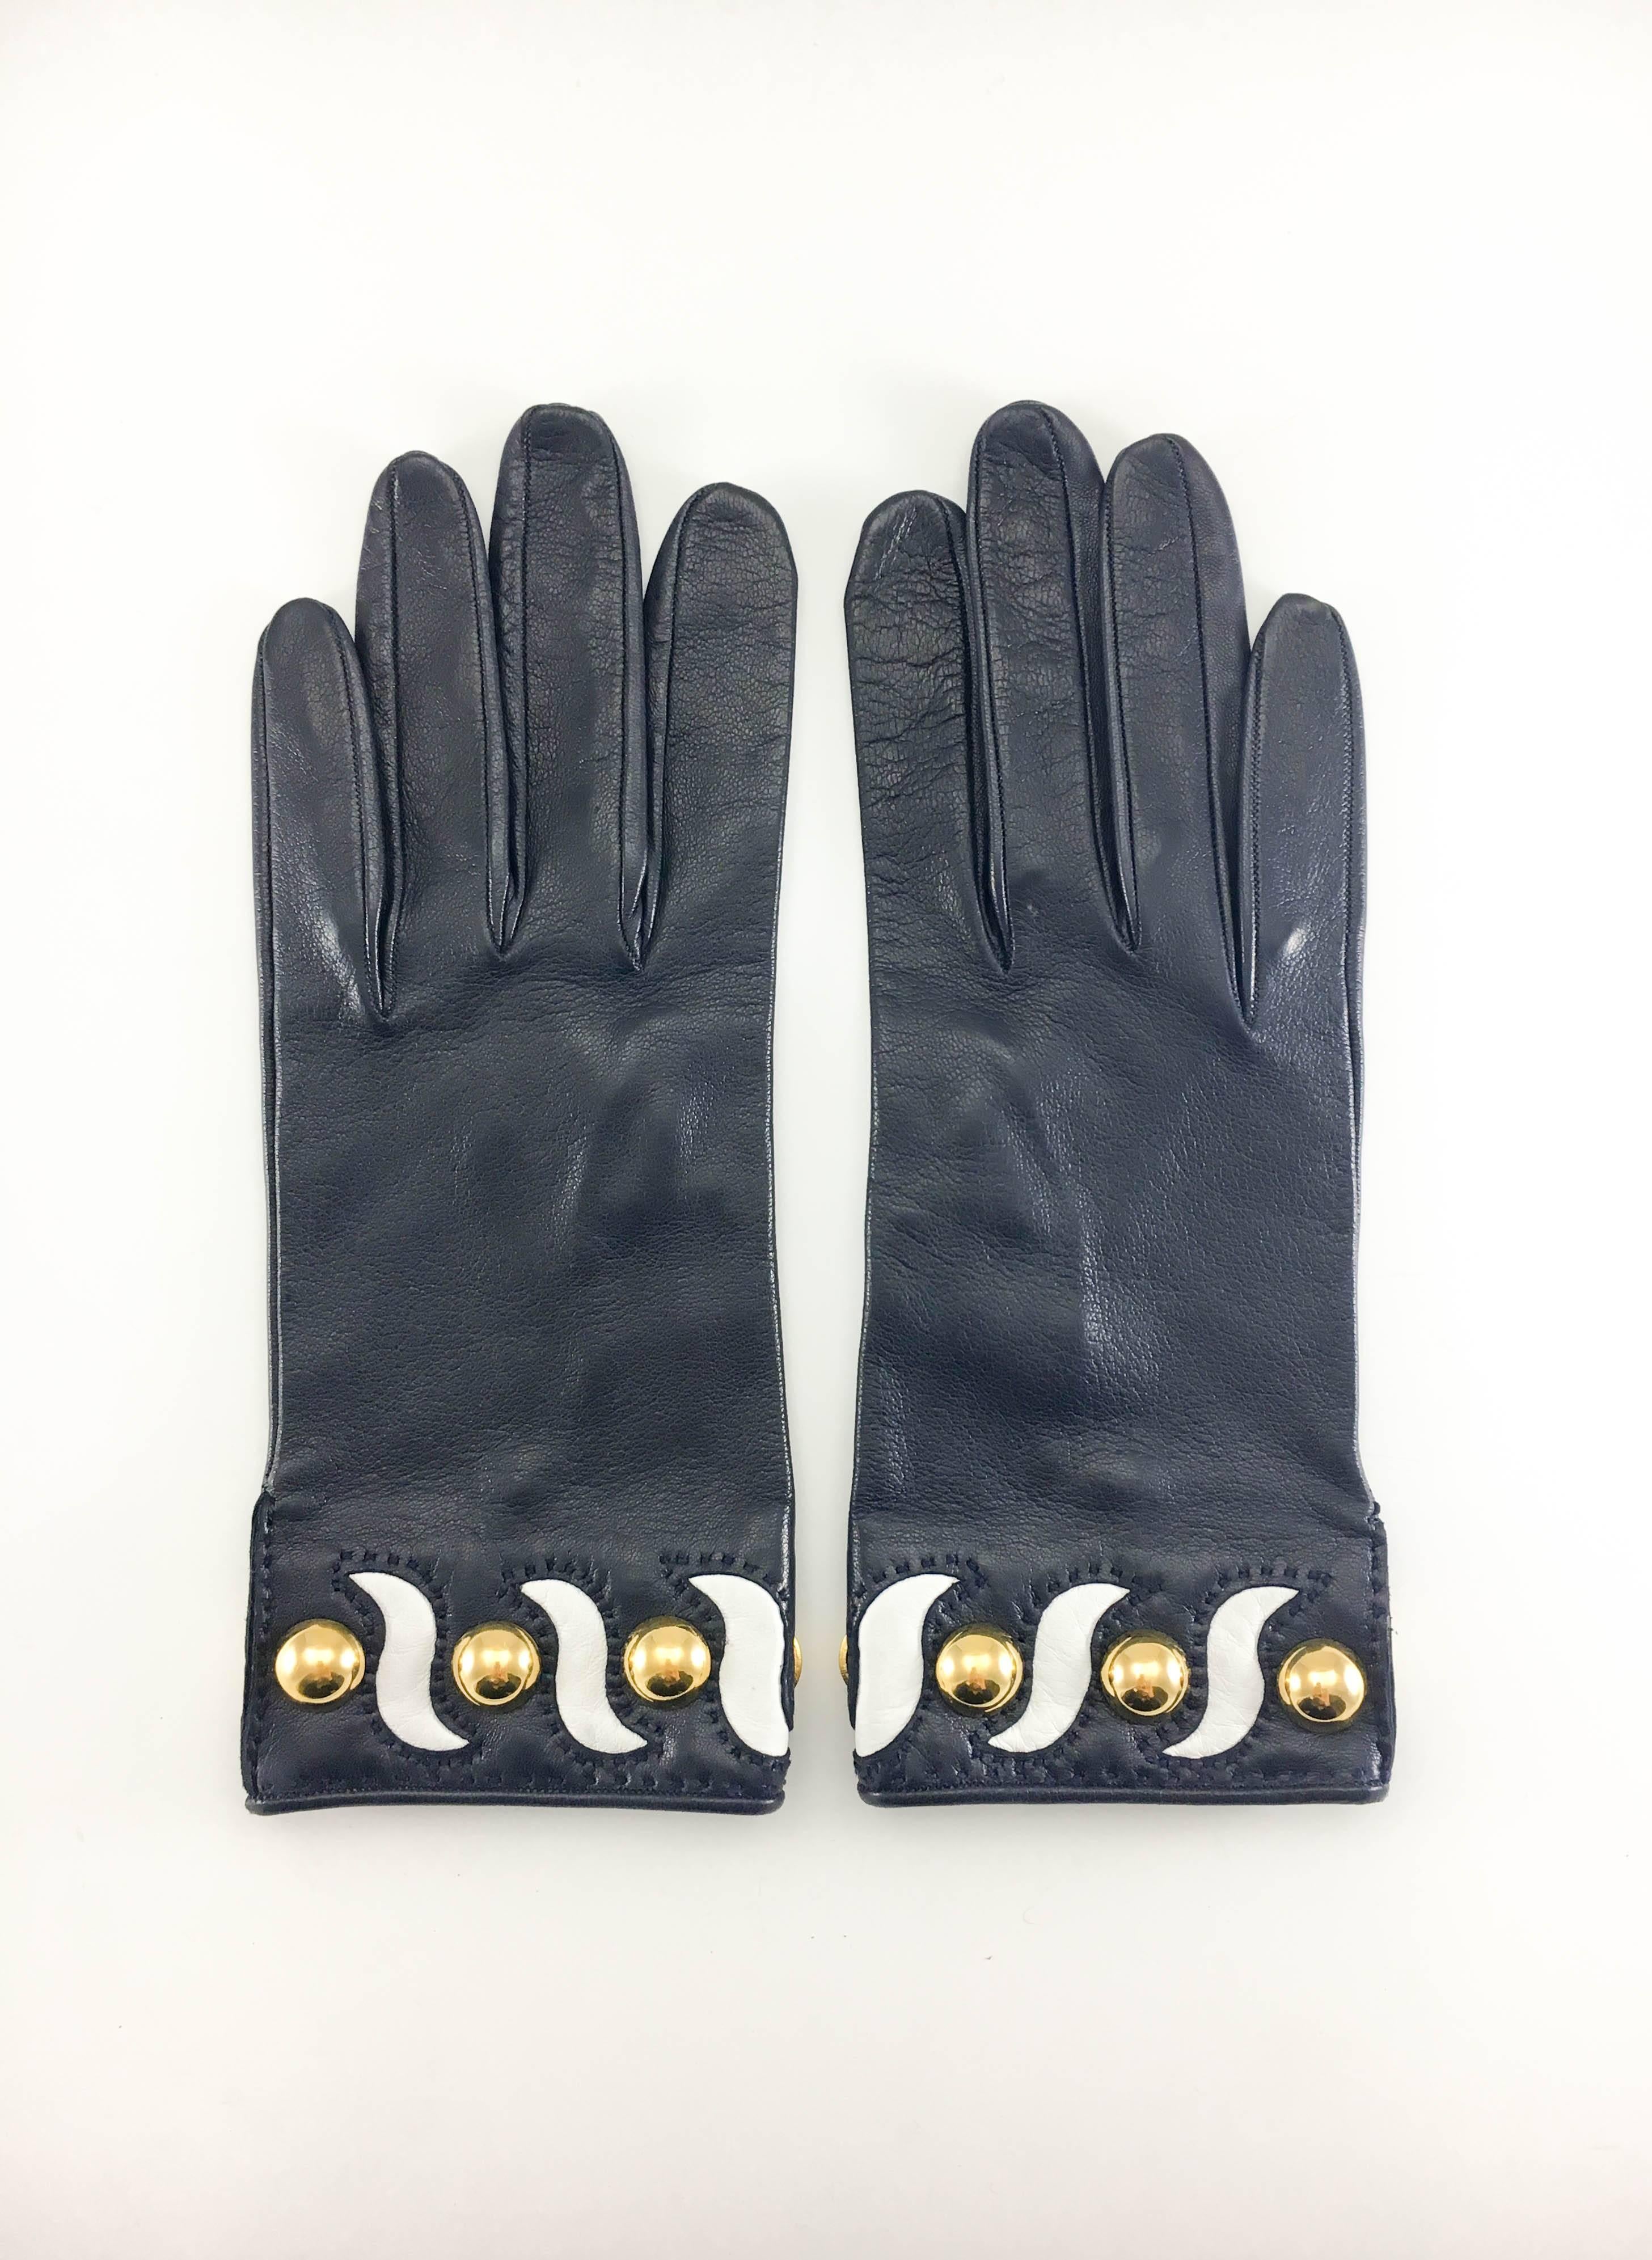 These very stylish gloves by Hermes are made in navy blue leather and feature white leather waves and gilt studs pattern to the wrist. So chic!

Label / Designer: Hermes

Period: 21st Century

Origin: France

Materials: Leather; Gilt Metal